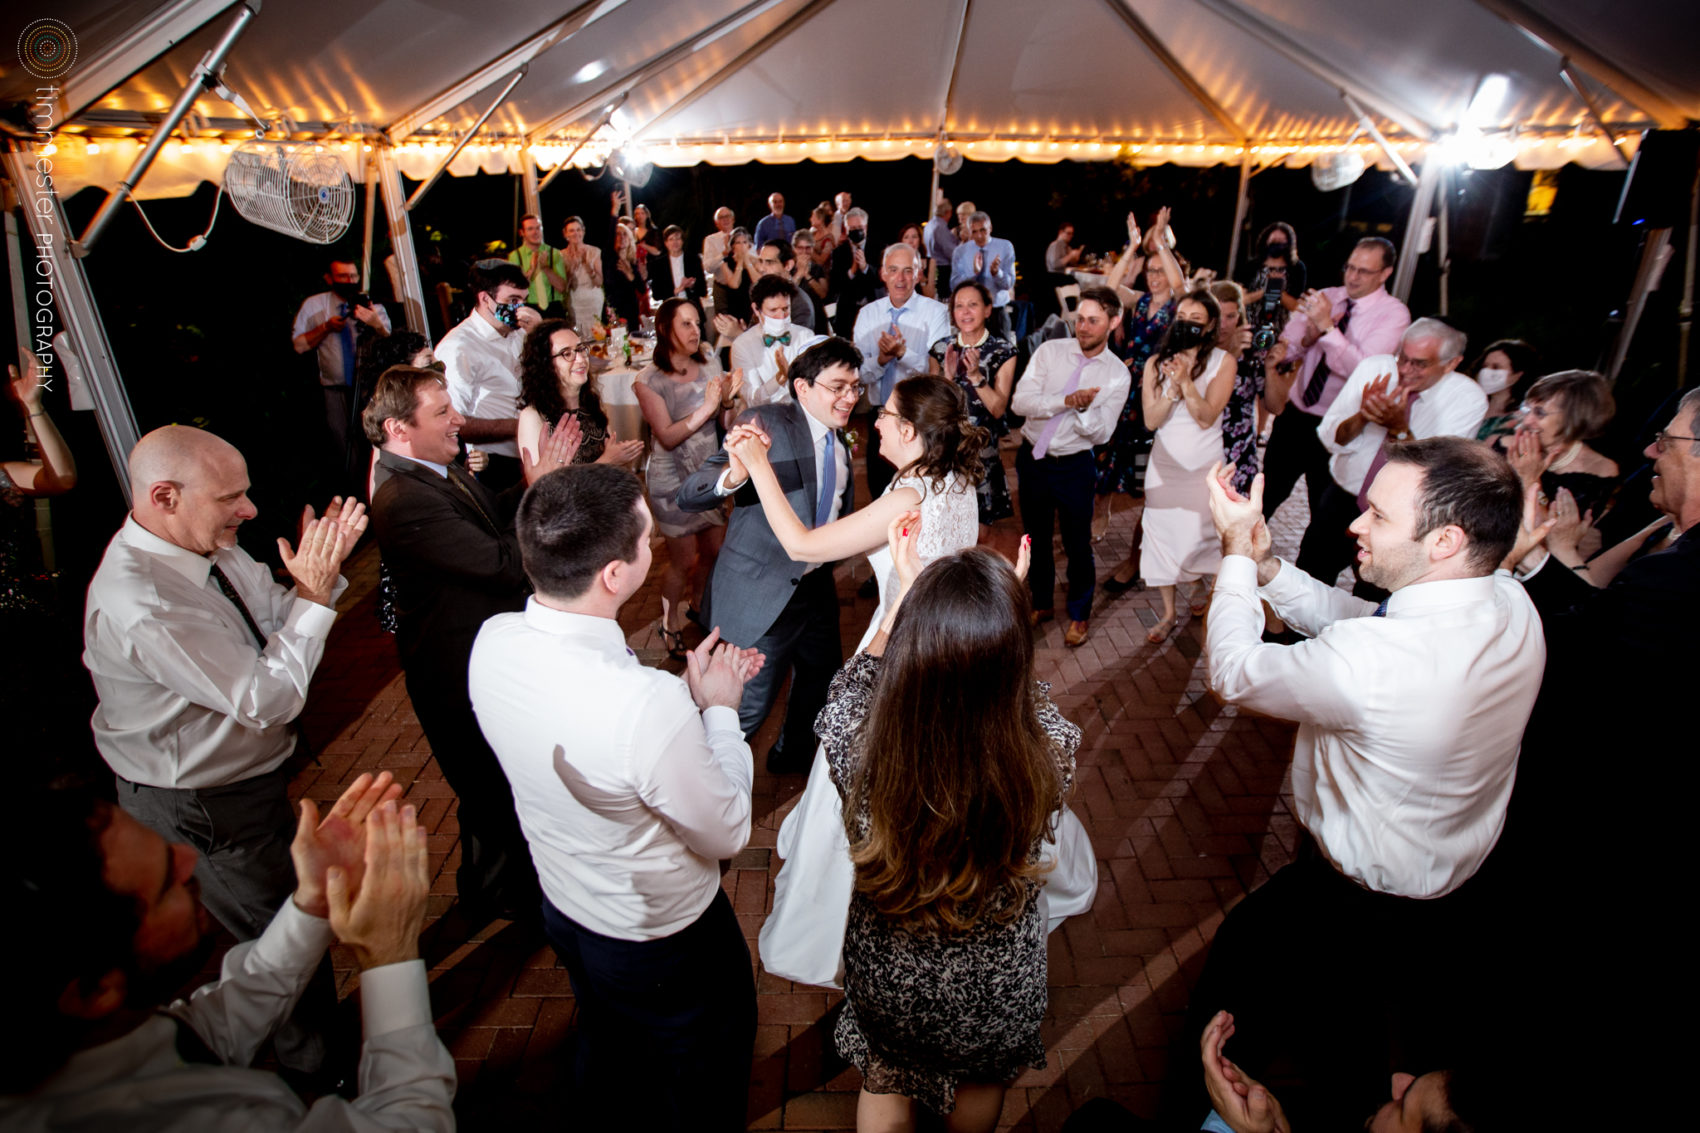 The outdoor wedding reception and Hora at the Museum of Life and Science in Durham, NC